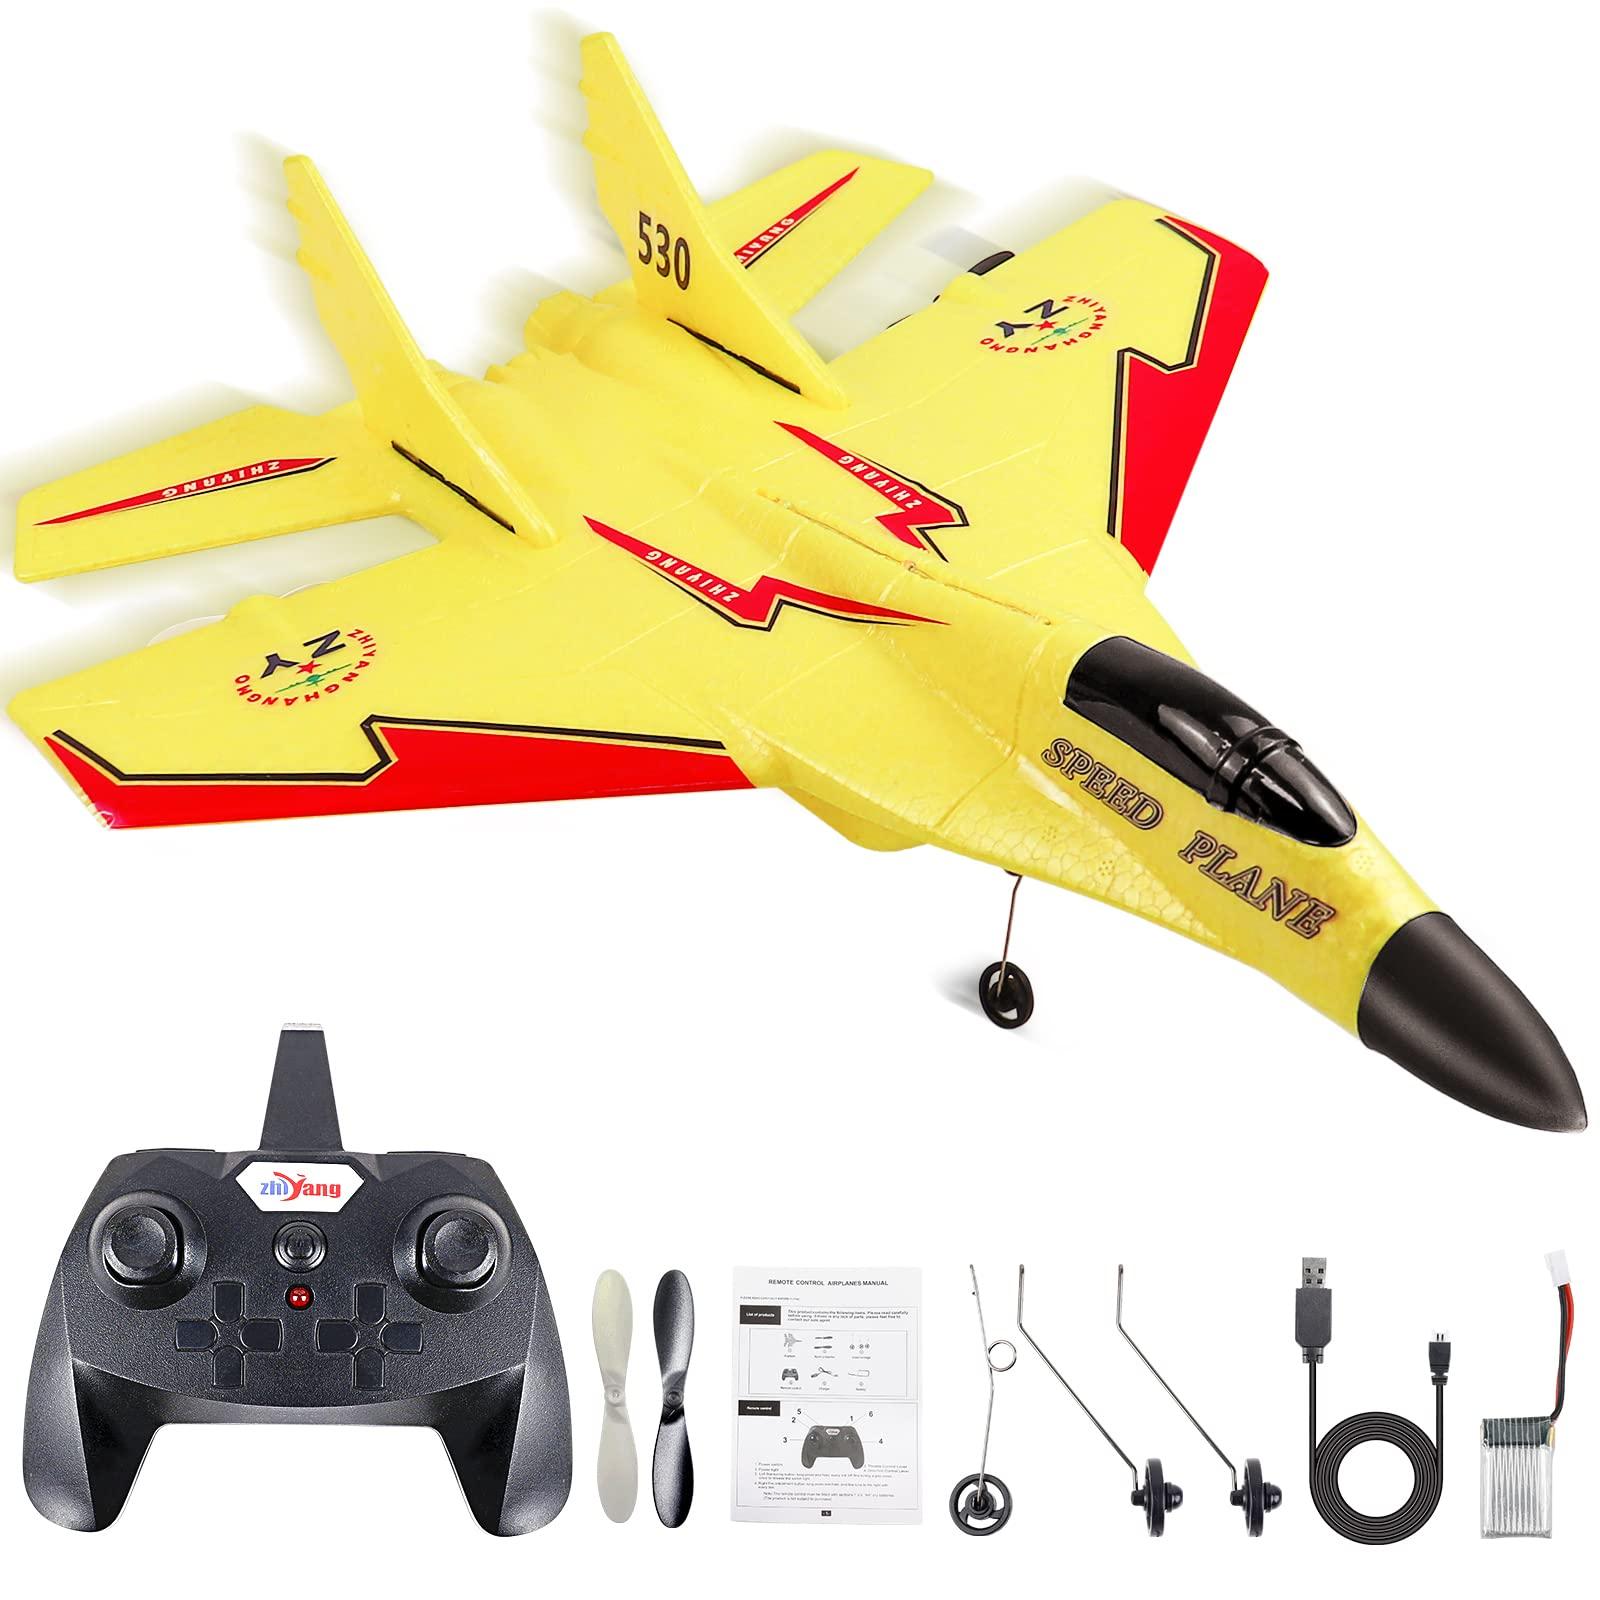 Kidstoylover Airplane: Exciting Features of Kidstoylover Airplane for Kids Who Love Aviation